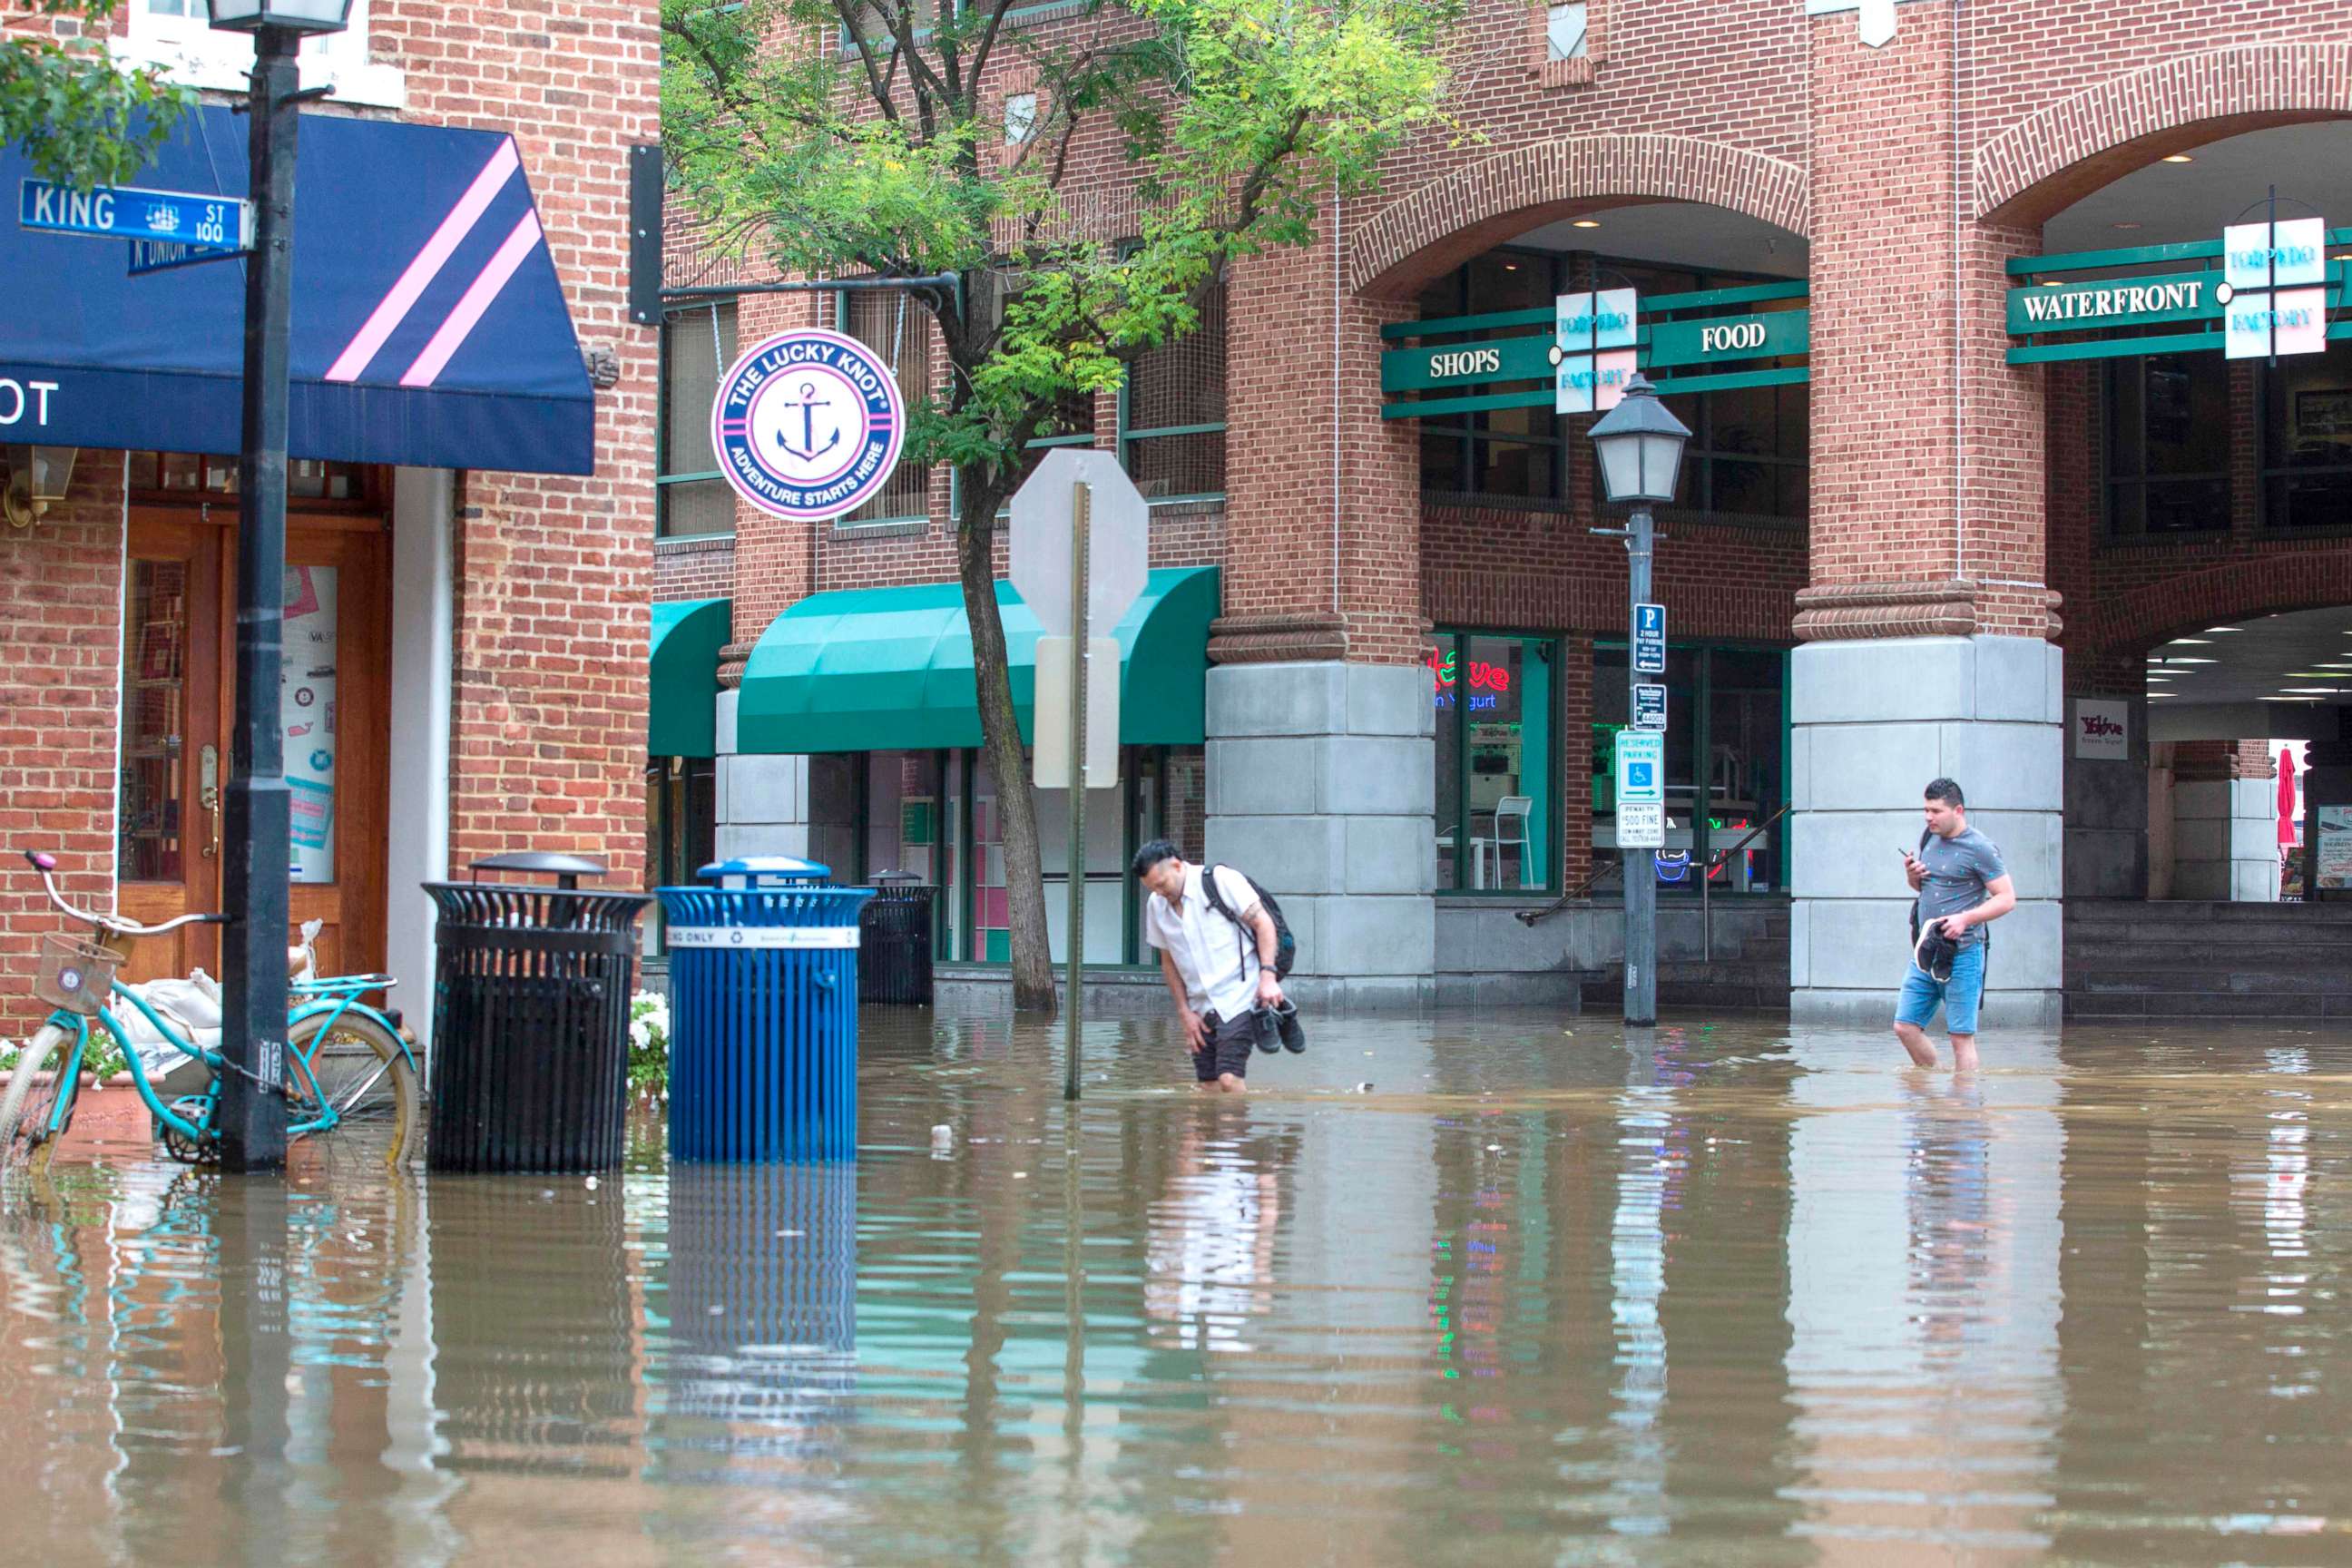 PHOTO: People cross the street as water floods outside buildings in Old Town Alexandria, Va., Sept. 11, 2018.